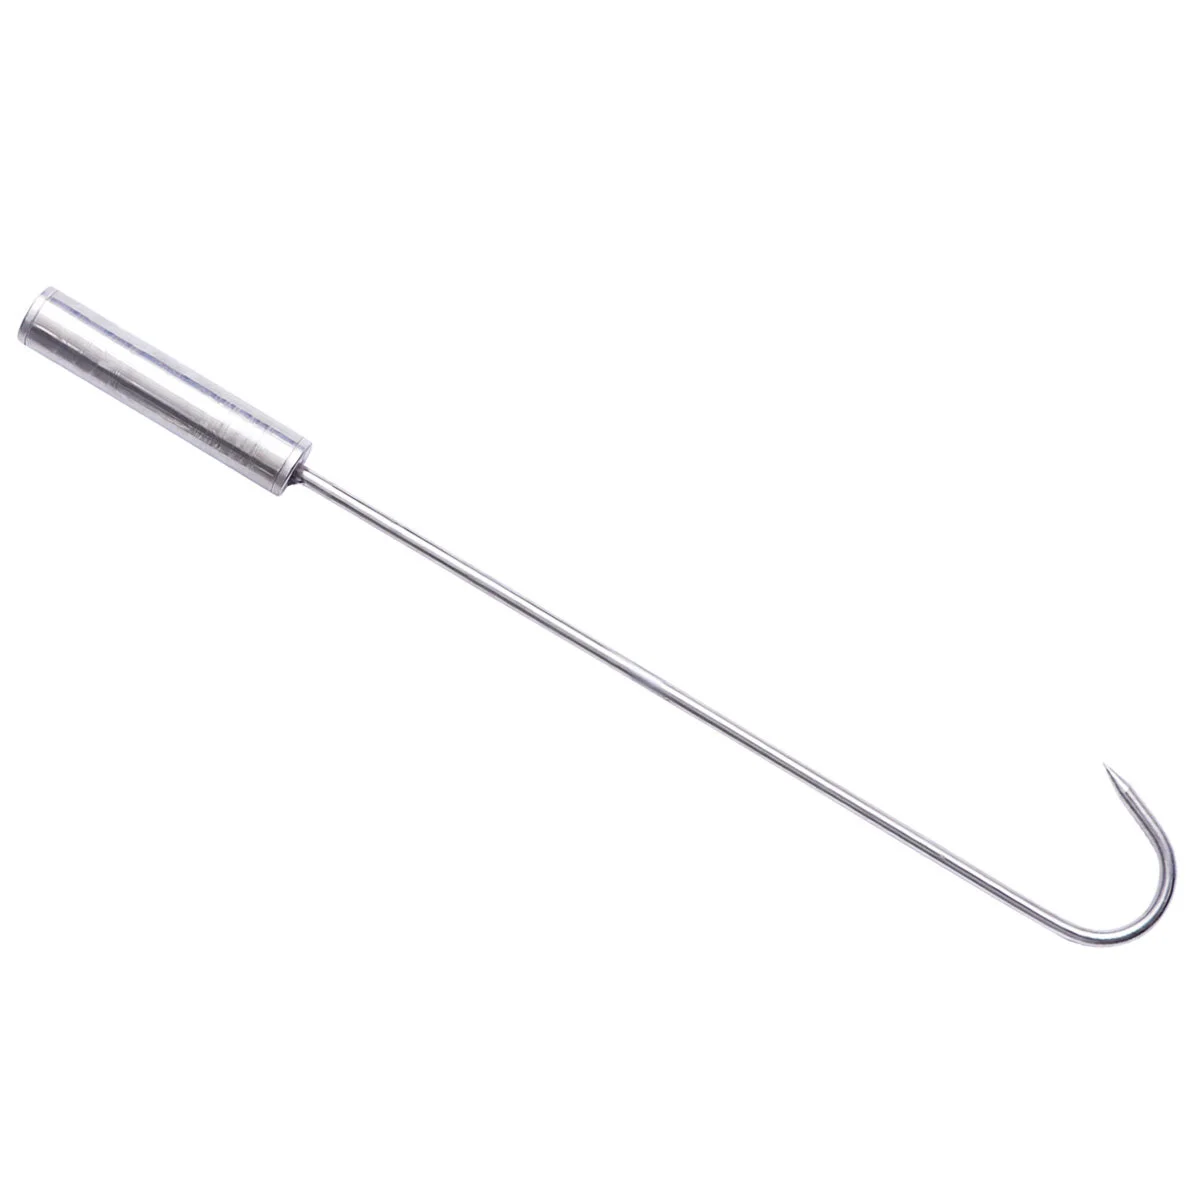 

Barbecue Hook Stainless Steel Meat Beef Roasting Pin Hook Vegetable Chicken Bacon Grilling Hook for Home Kitchen